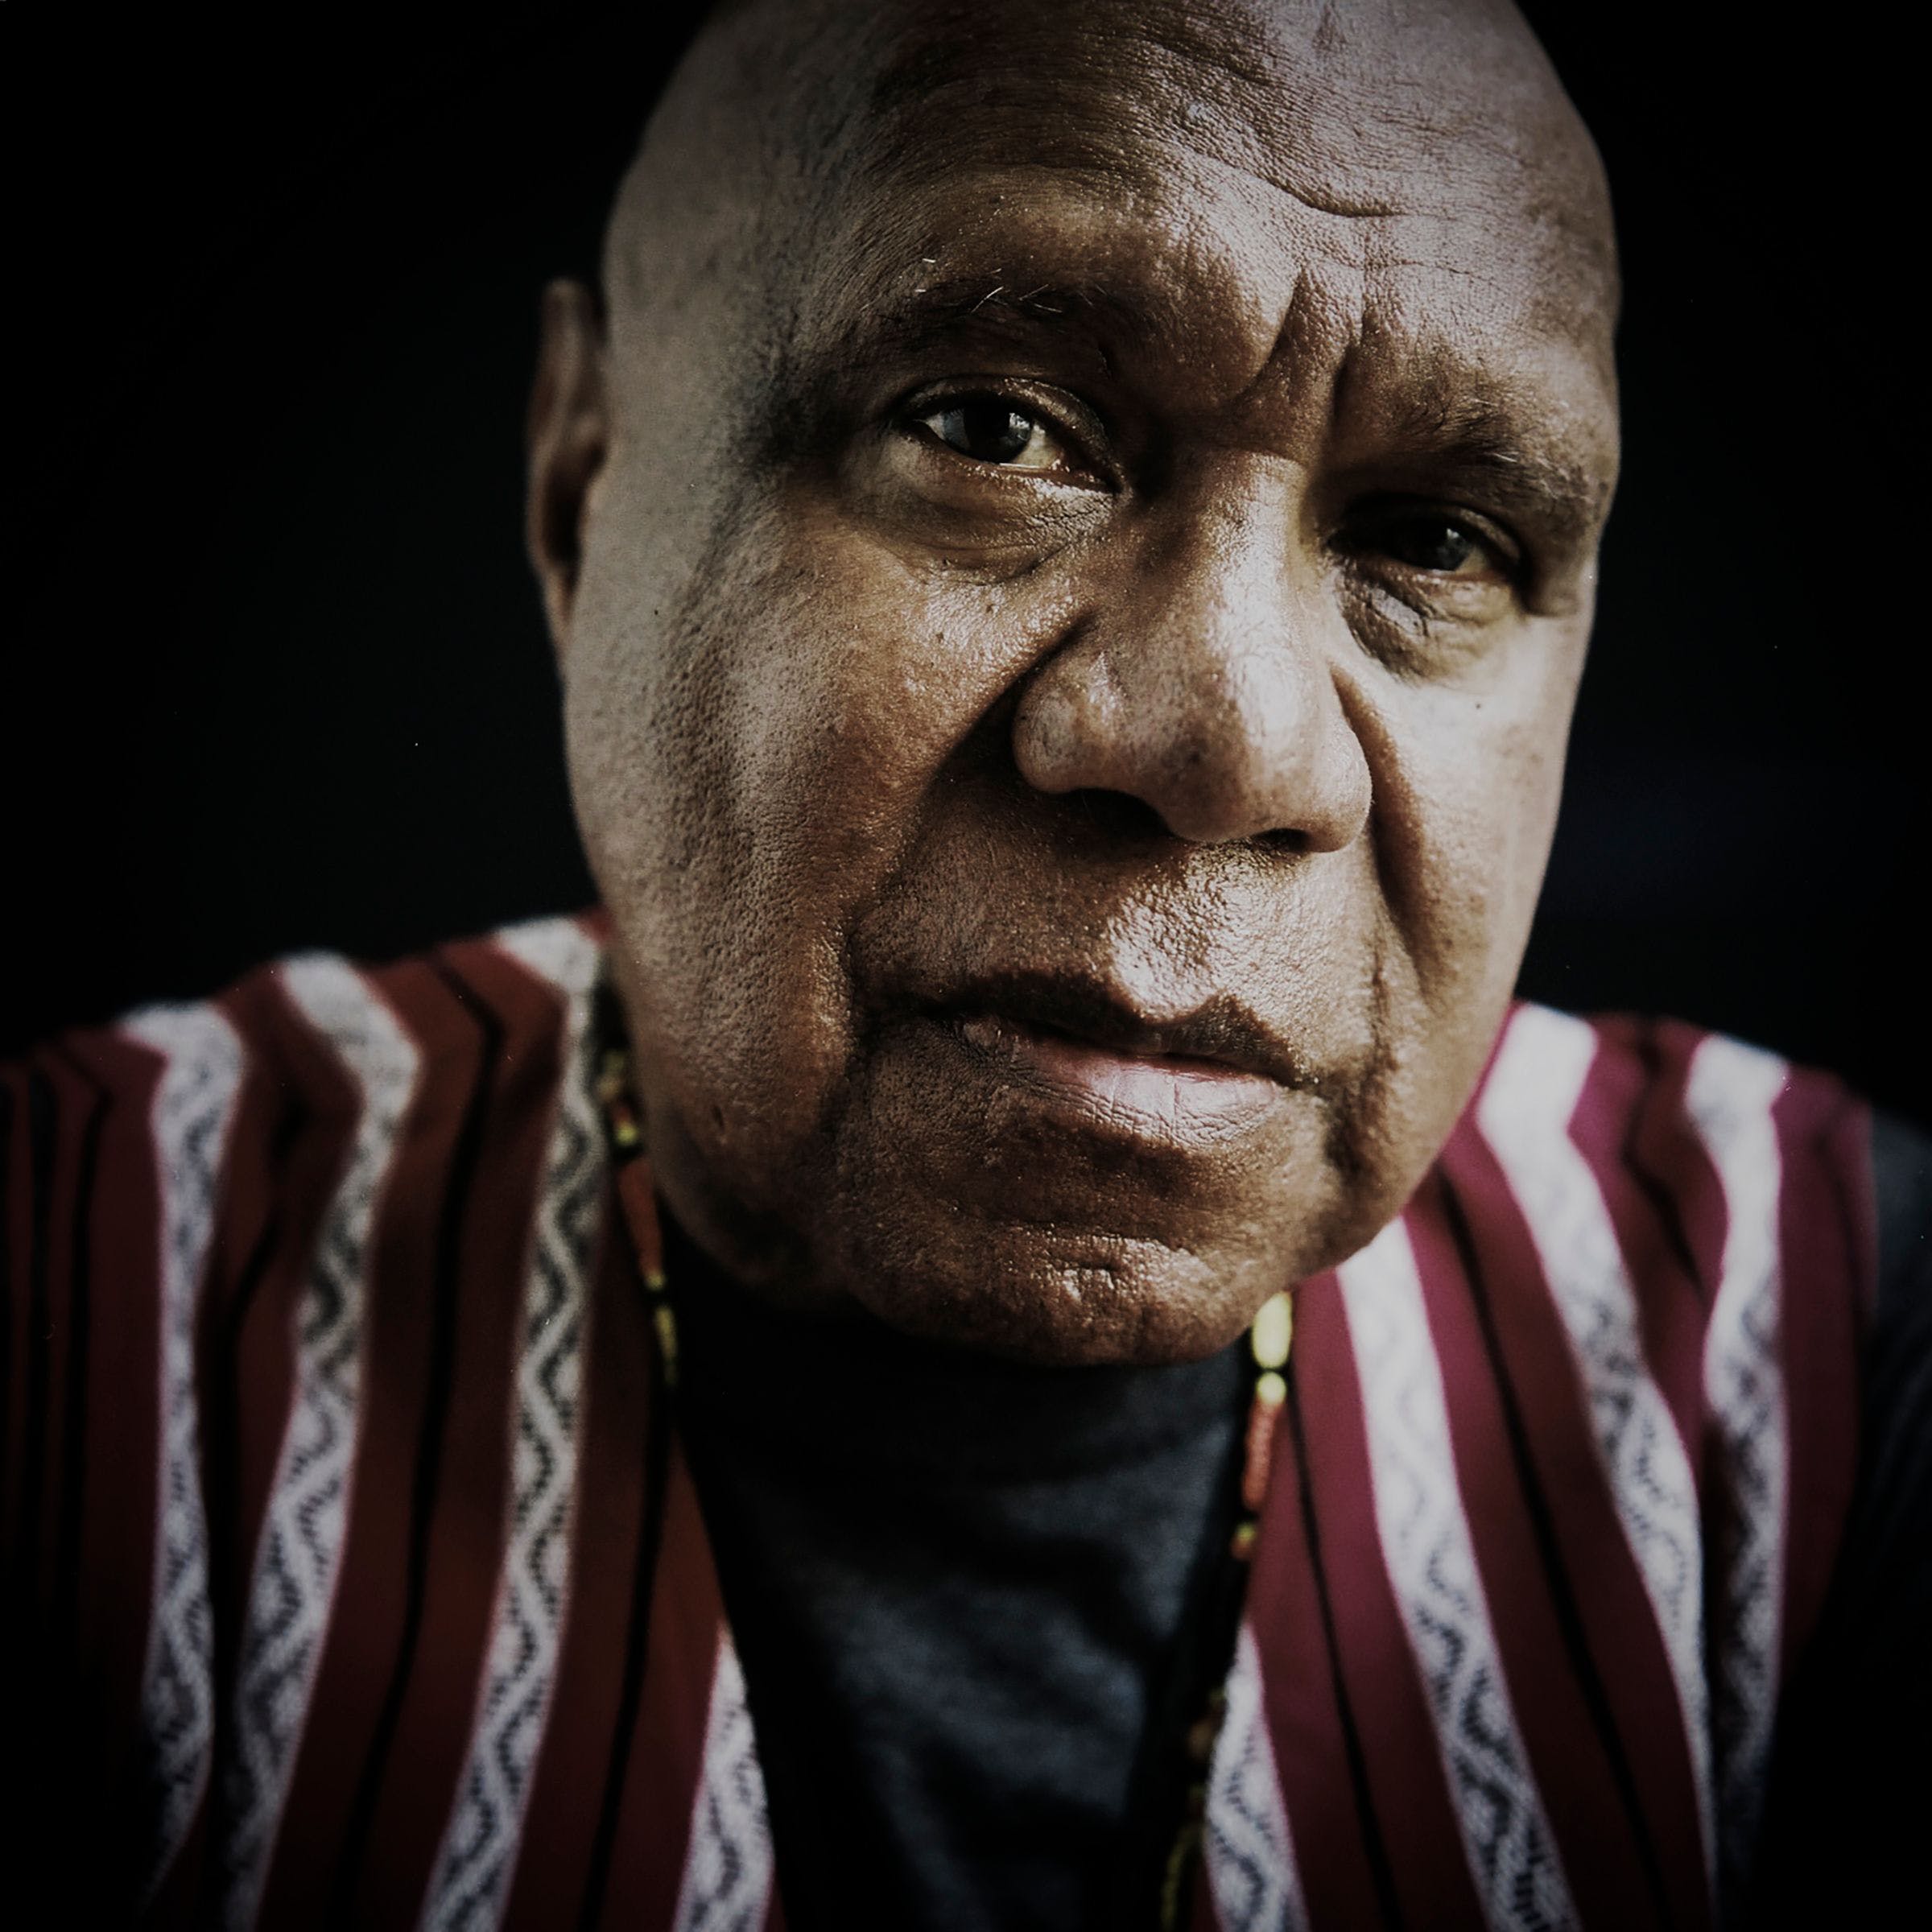 Archie Roach Tell Me Why - Melbourne Tourism